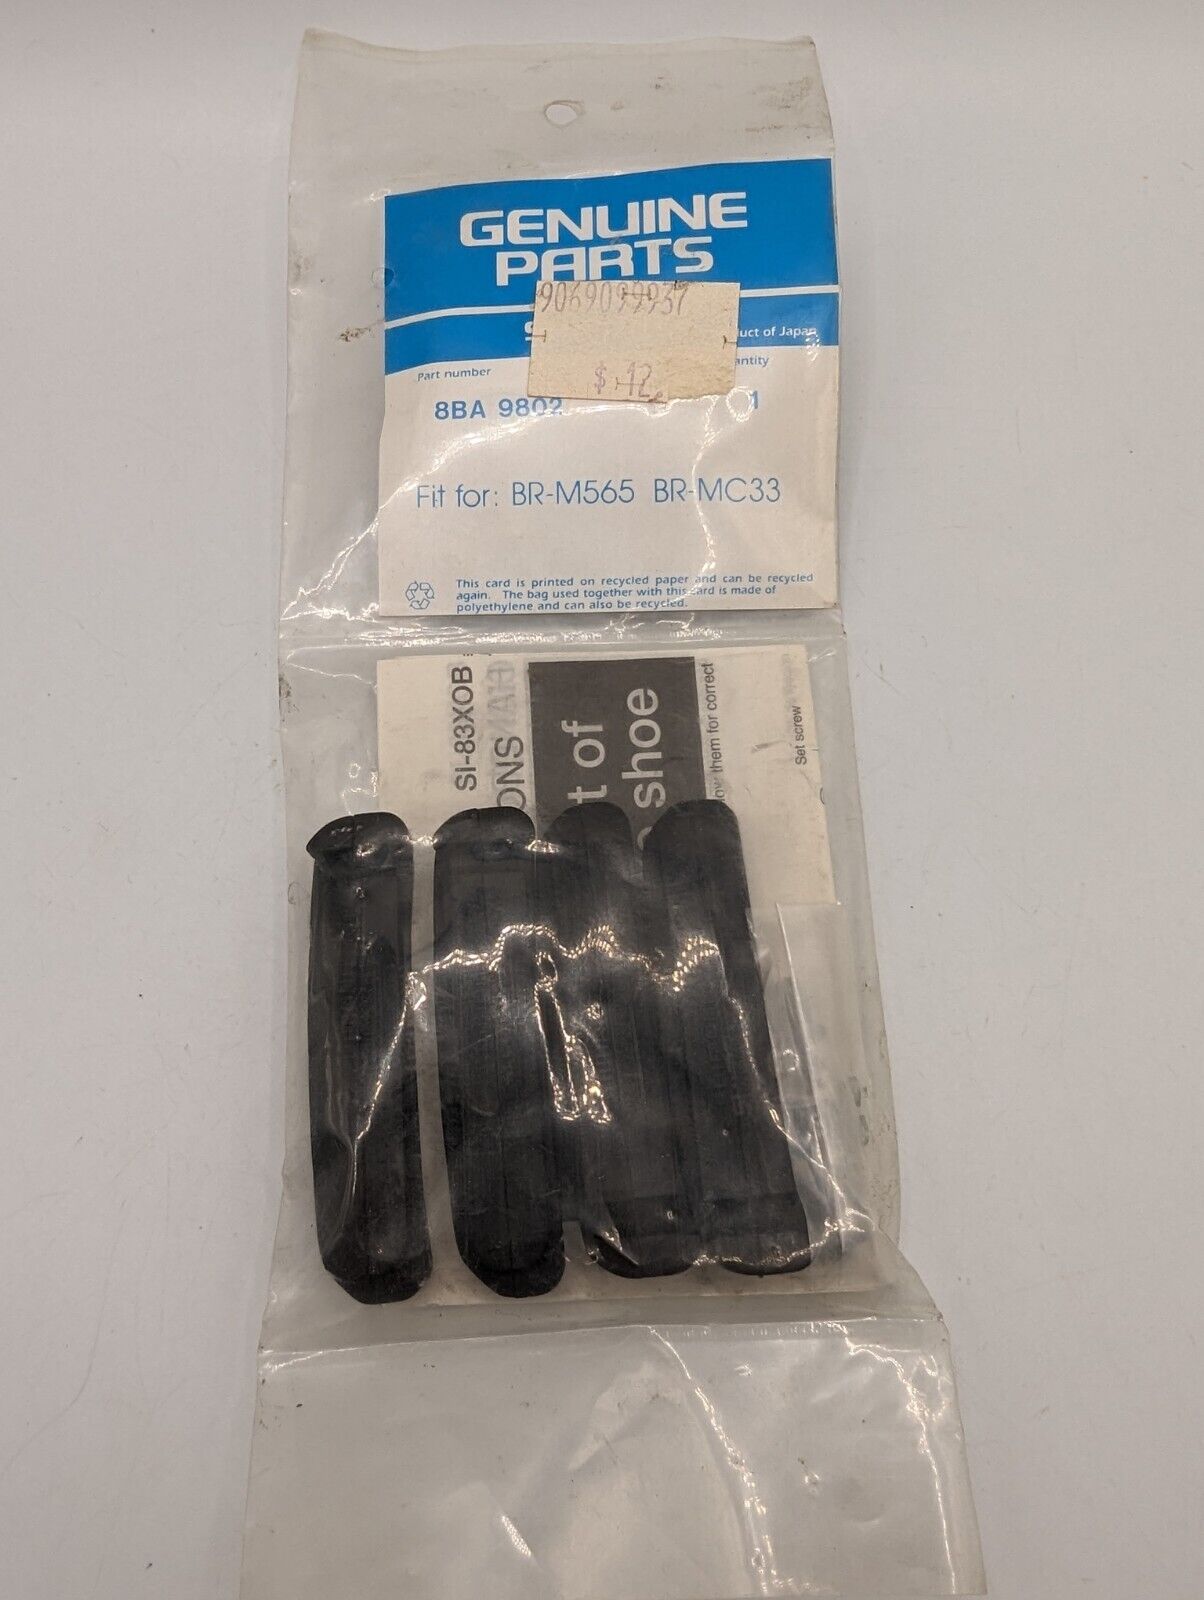 New-Old-Stock SHIMANO Set of Four (4) Replacement Bike Brake Pads • 8BA-9802